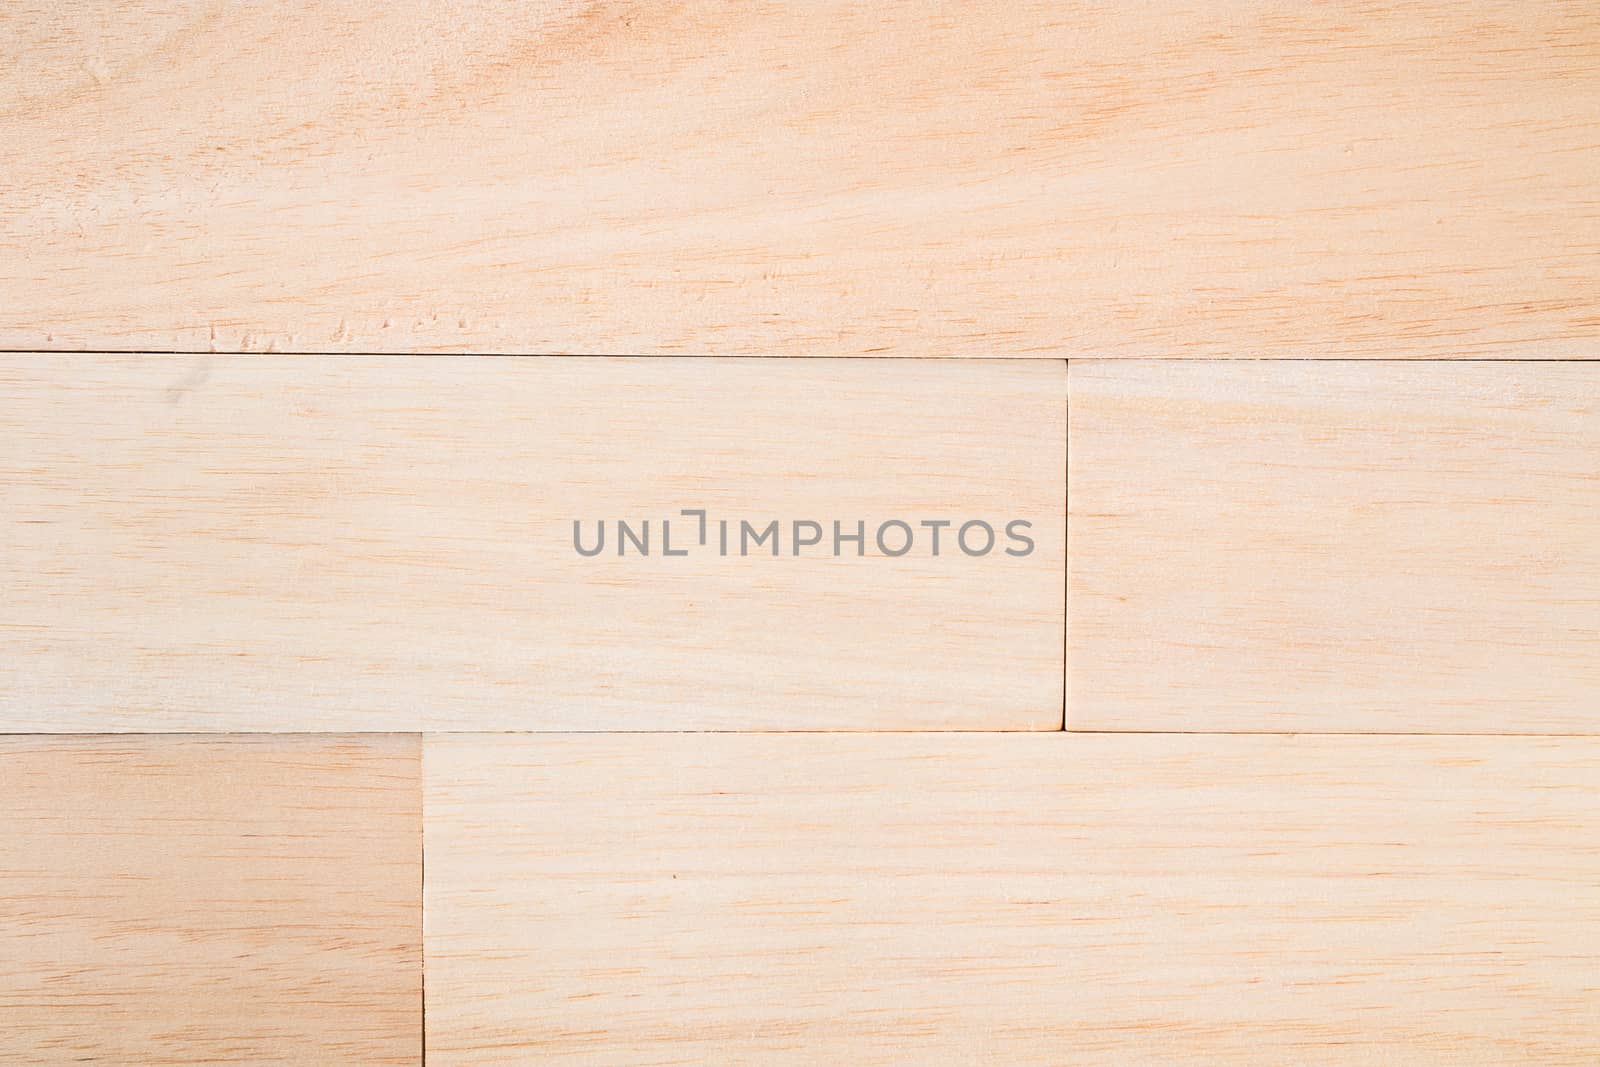 Pieces of wood texture and blank background,